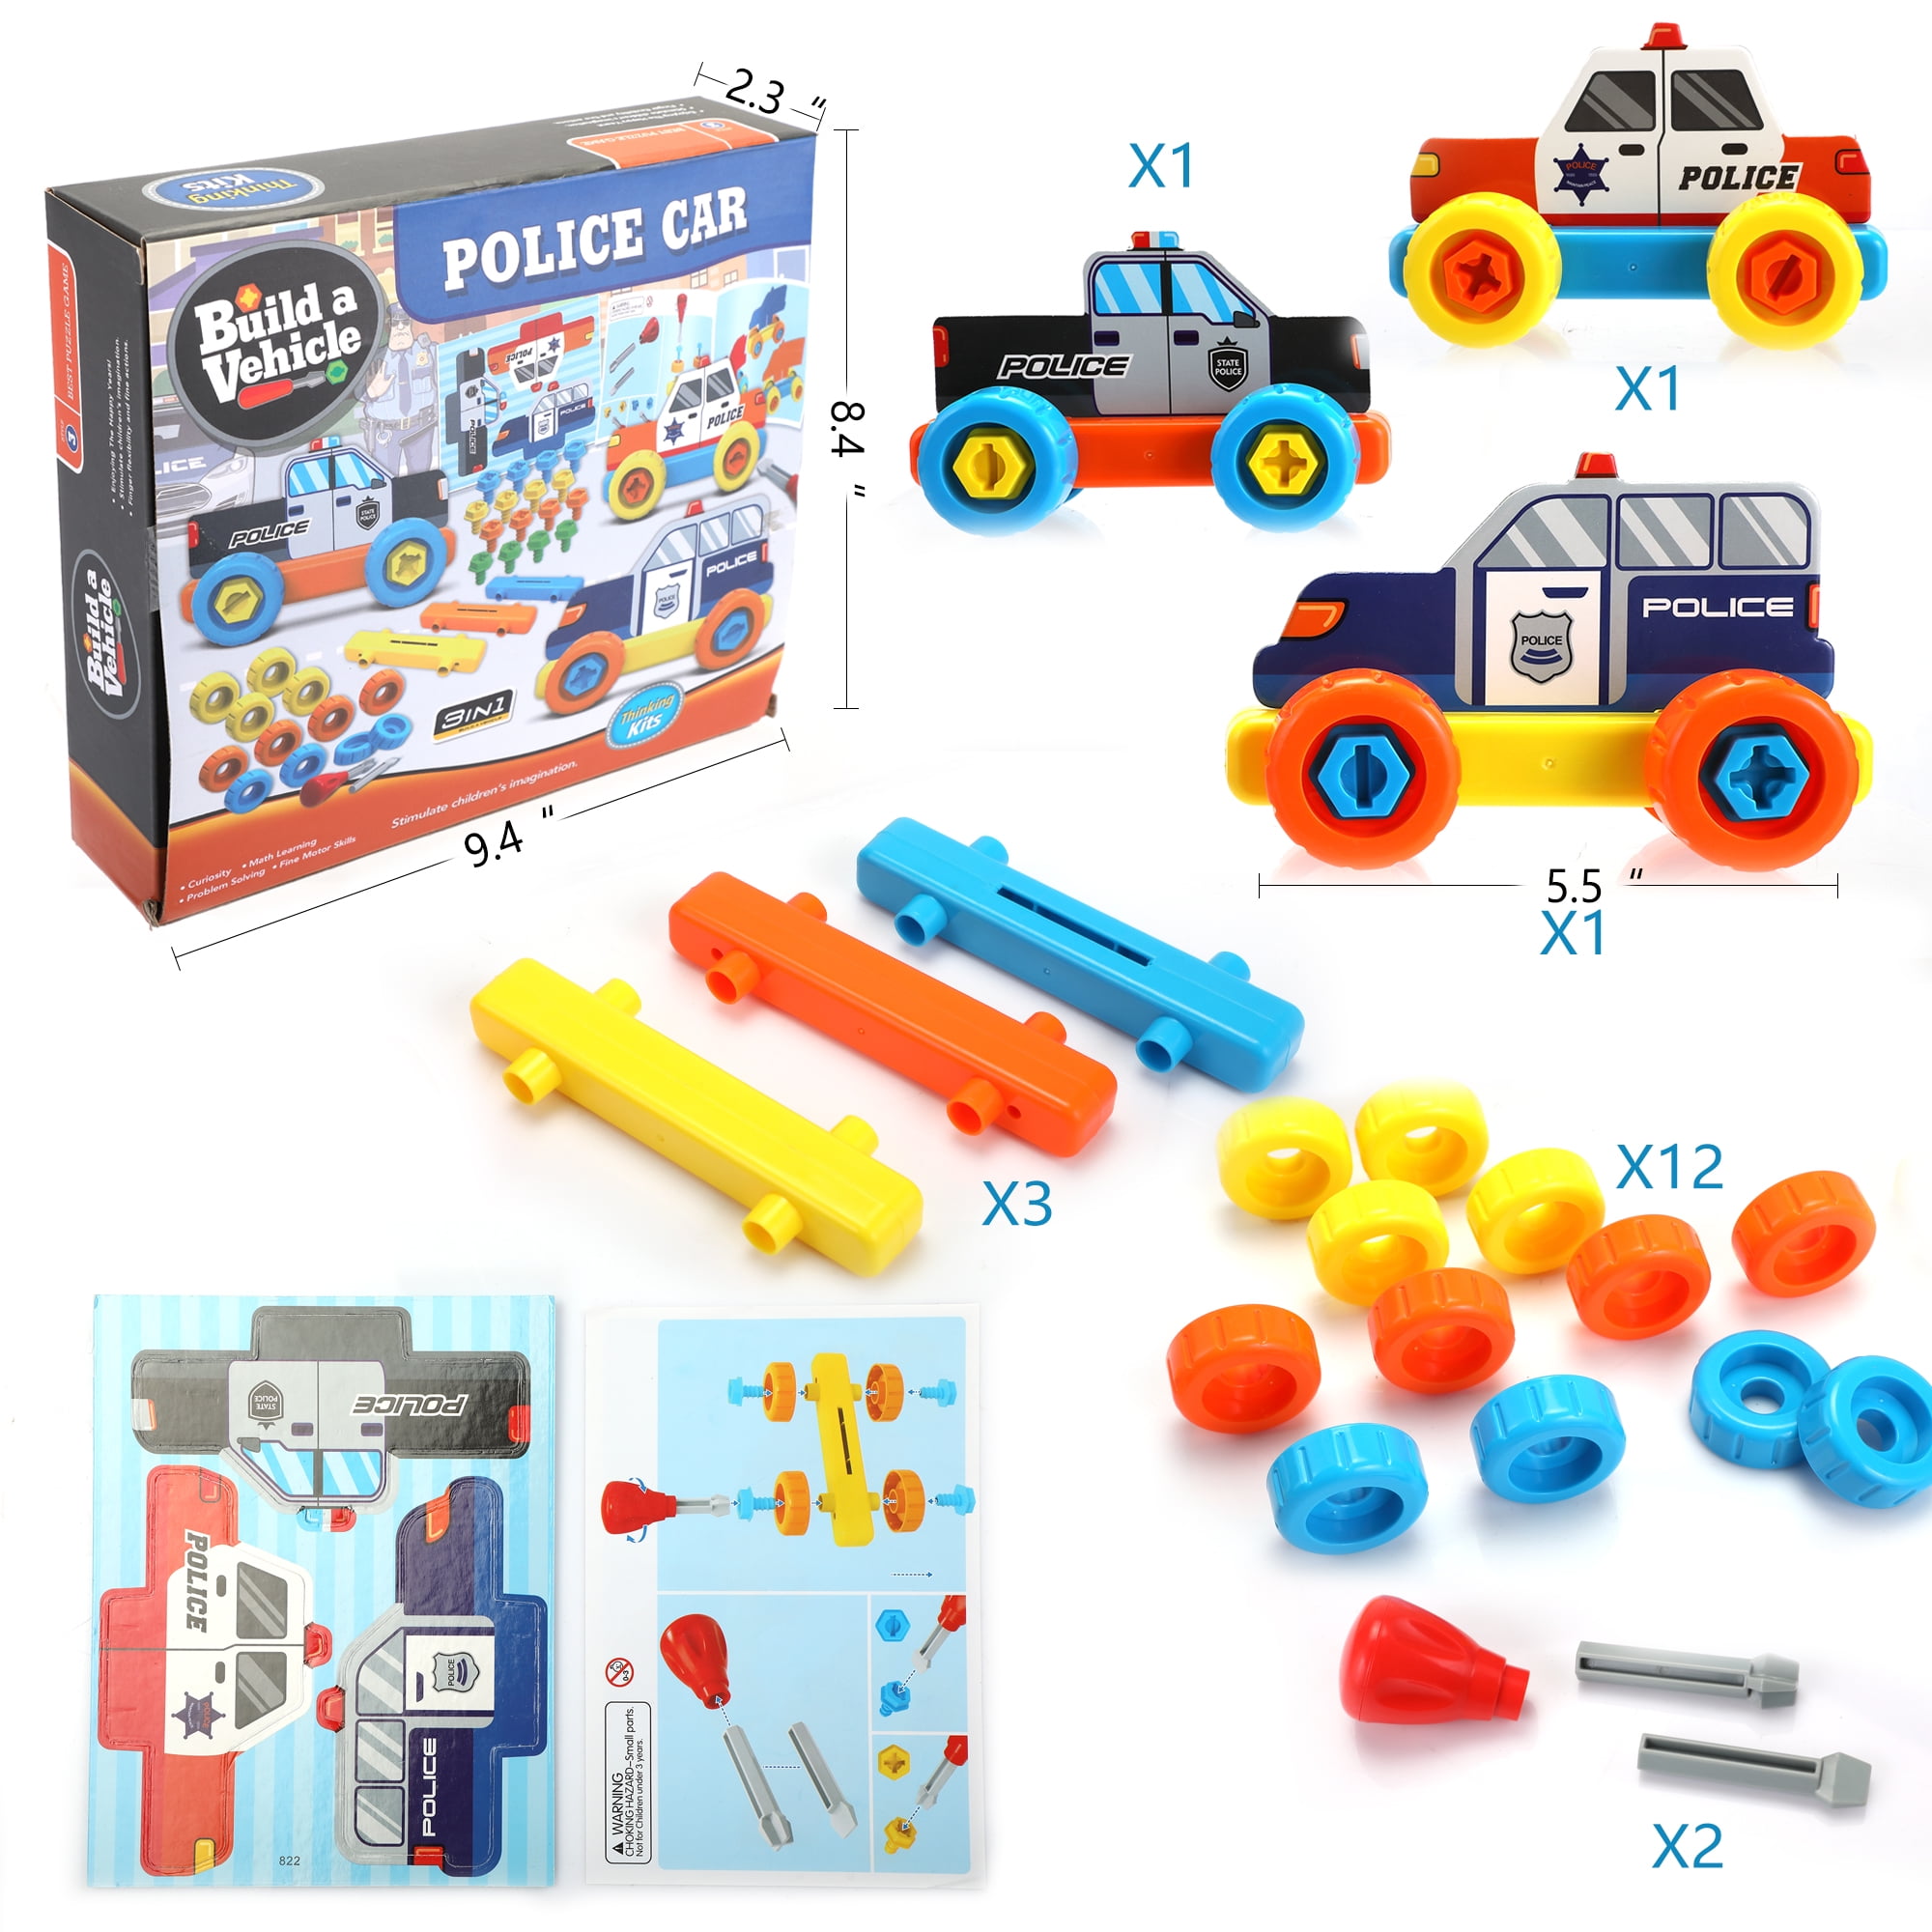 Veryke Police Series Toy Building Play Set STEM Learning for Kids Toddlers Aged 2 and Up, Gifts for Boys Girls